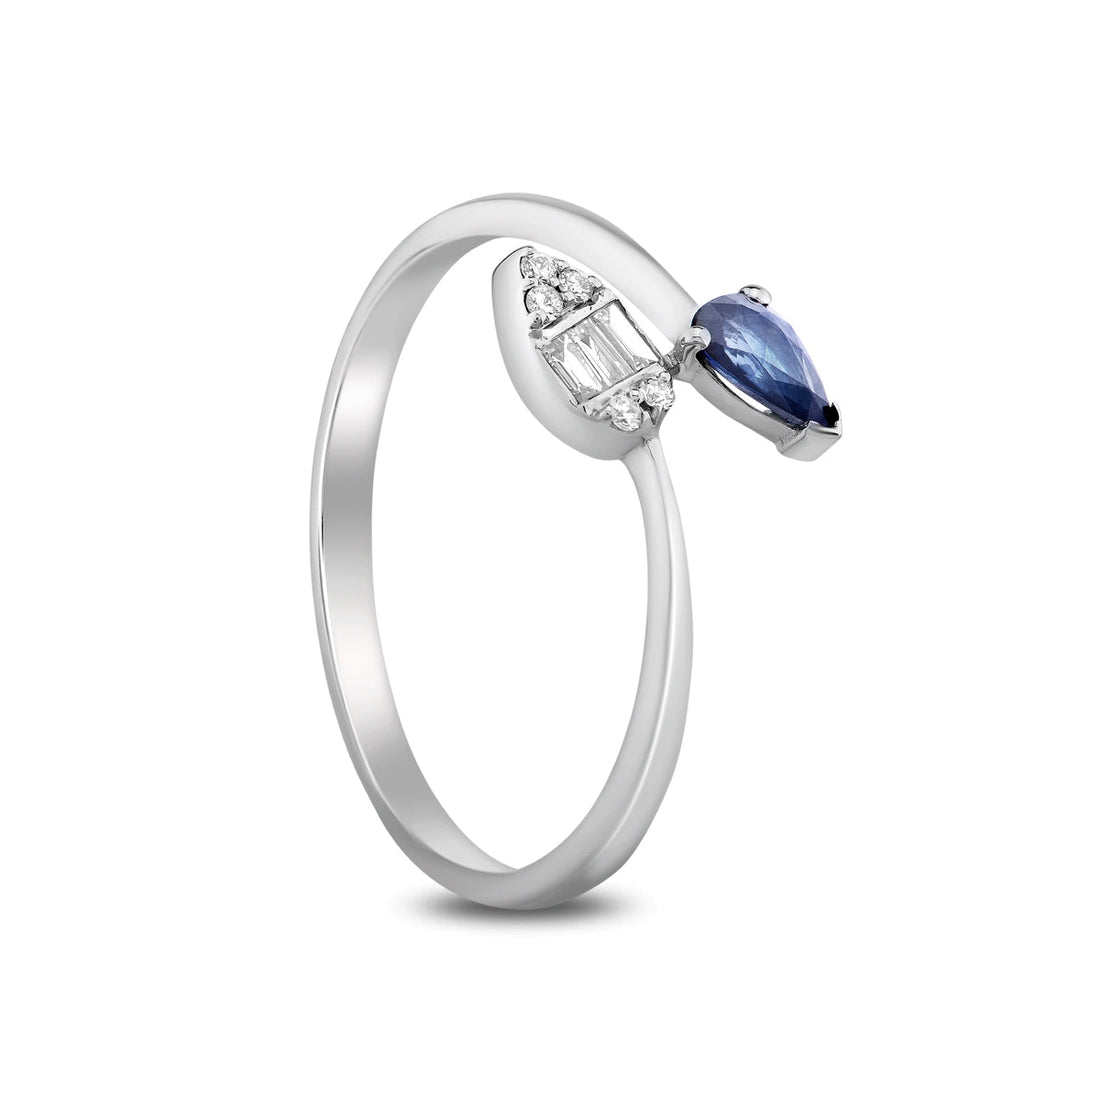 14K Yellow Gold Tear Drop Sapphire and Diamond Ring Shop online from Artisan Brands